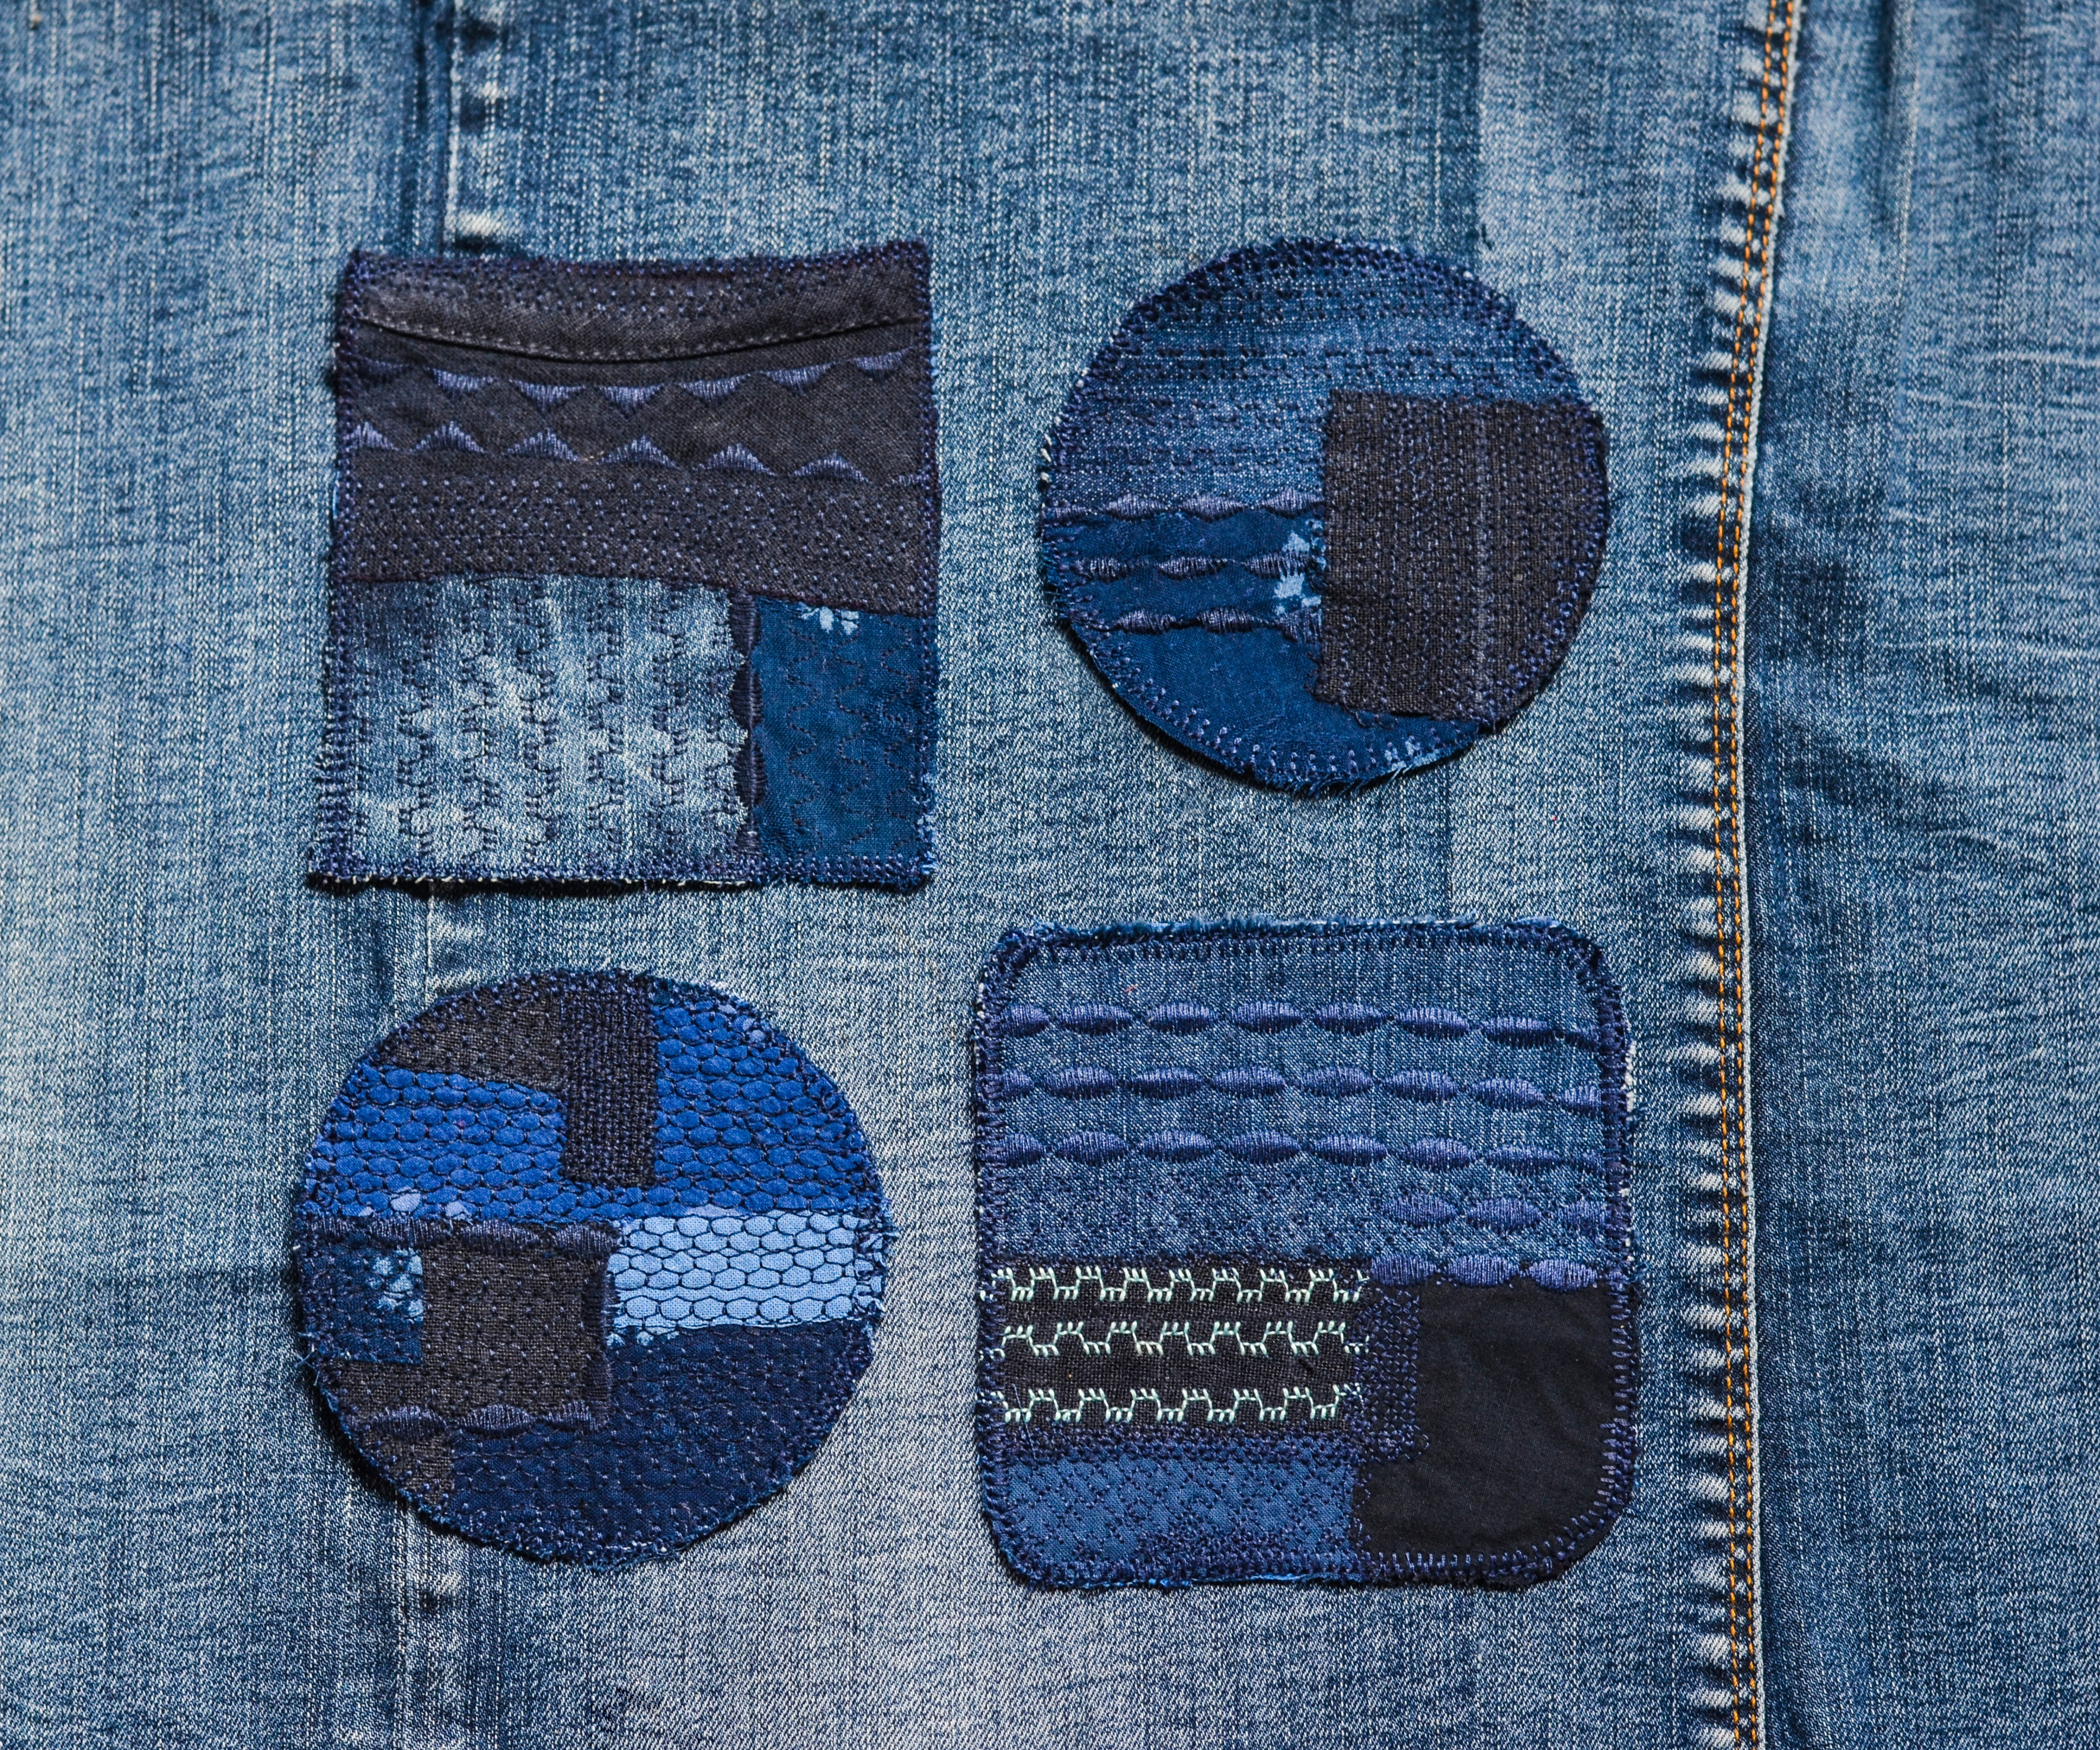 A denim piece of fabric with four visible mending patches sewn on it. 